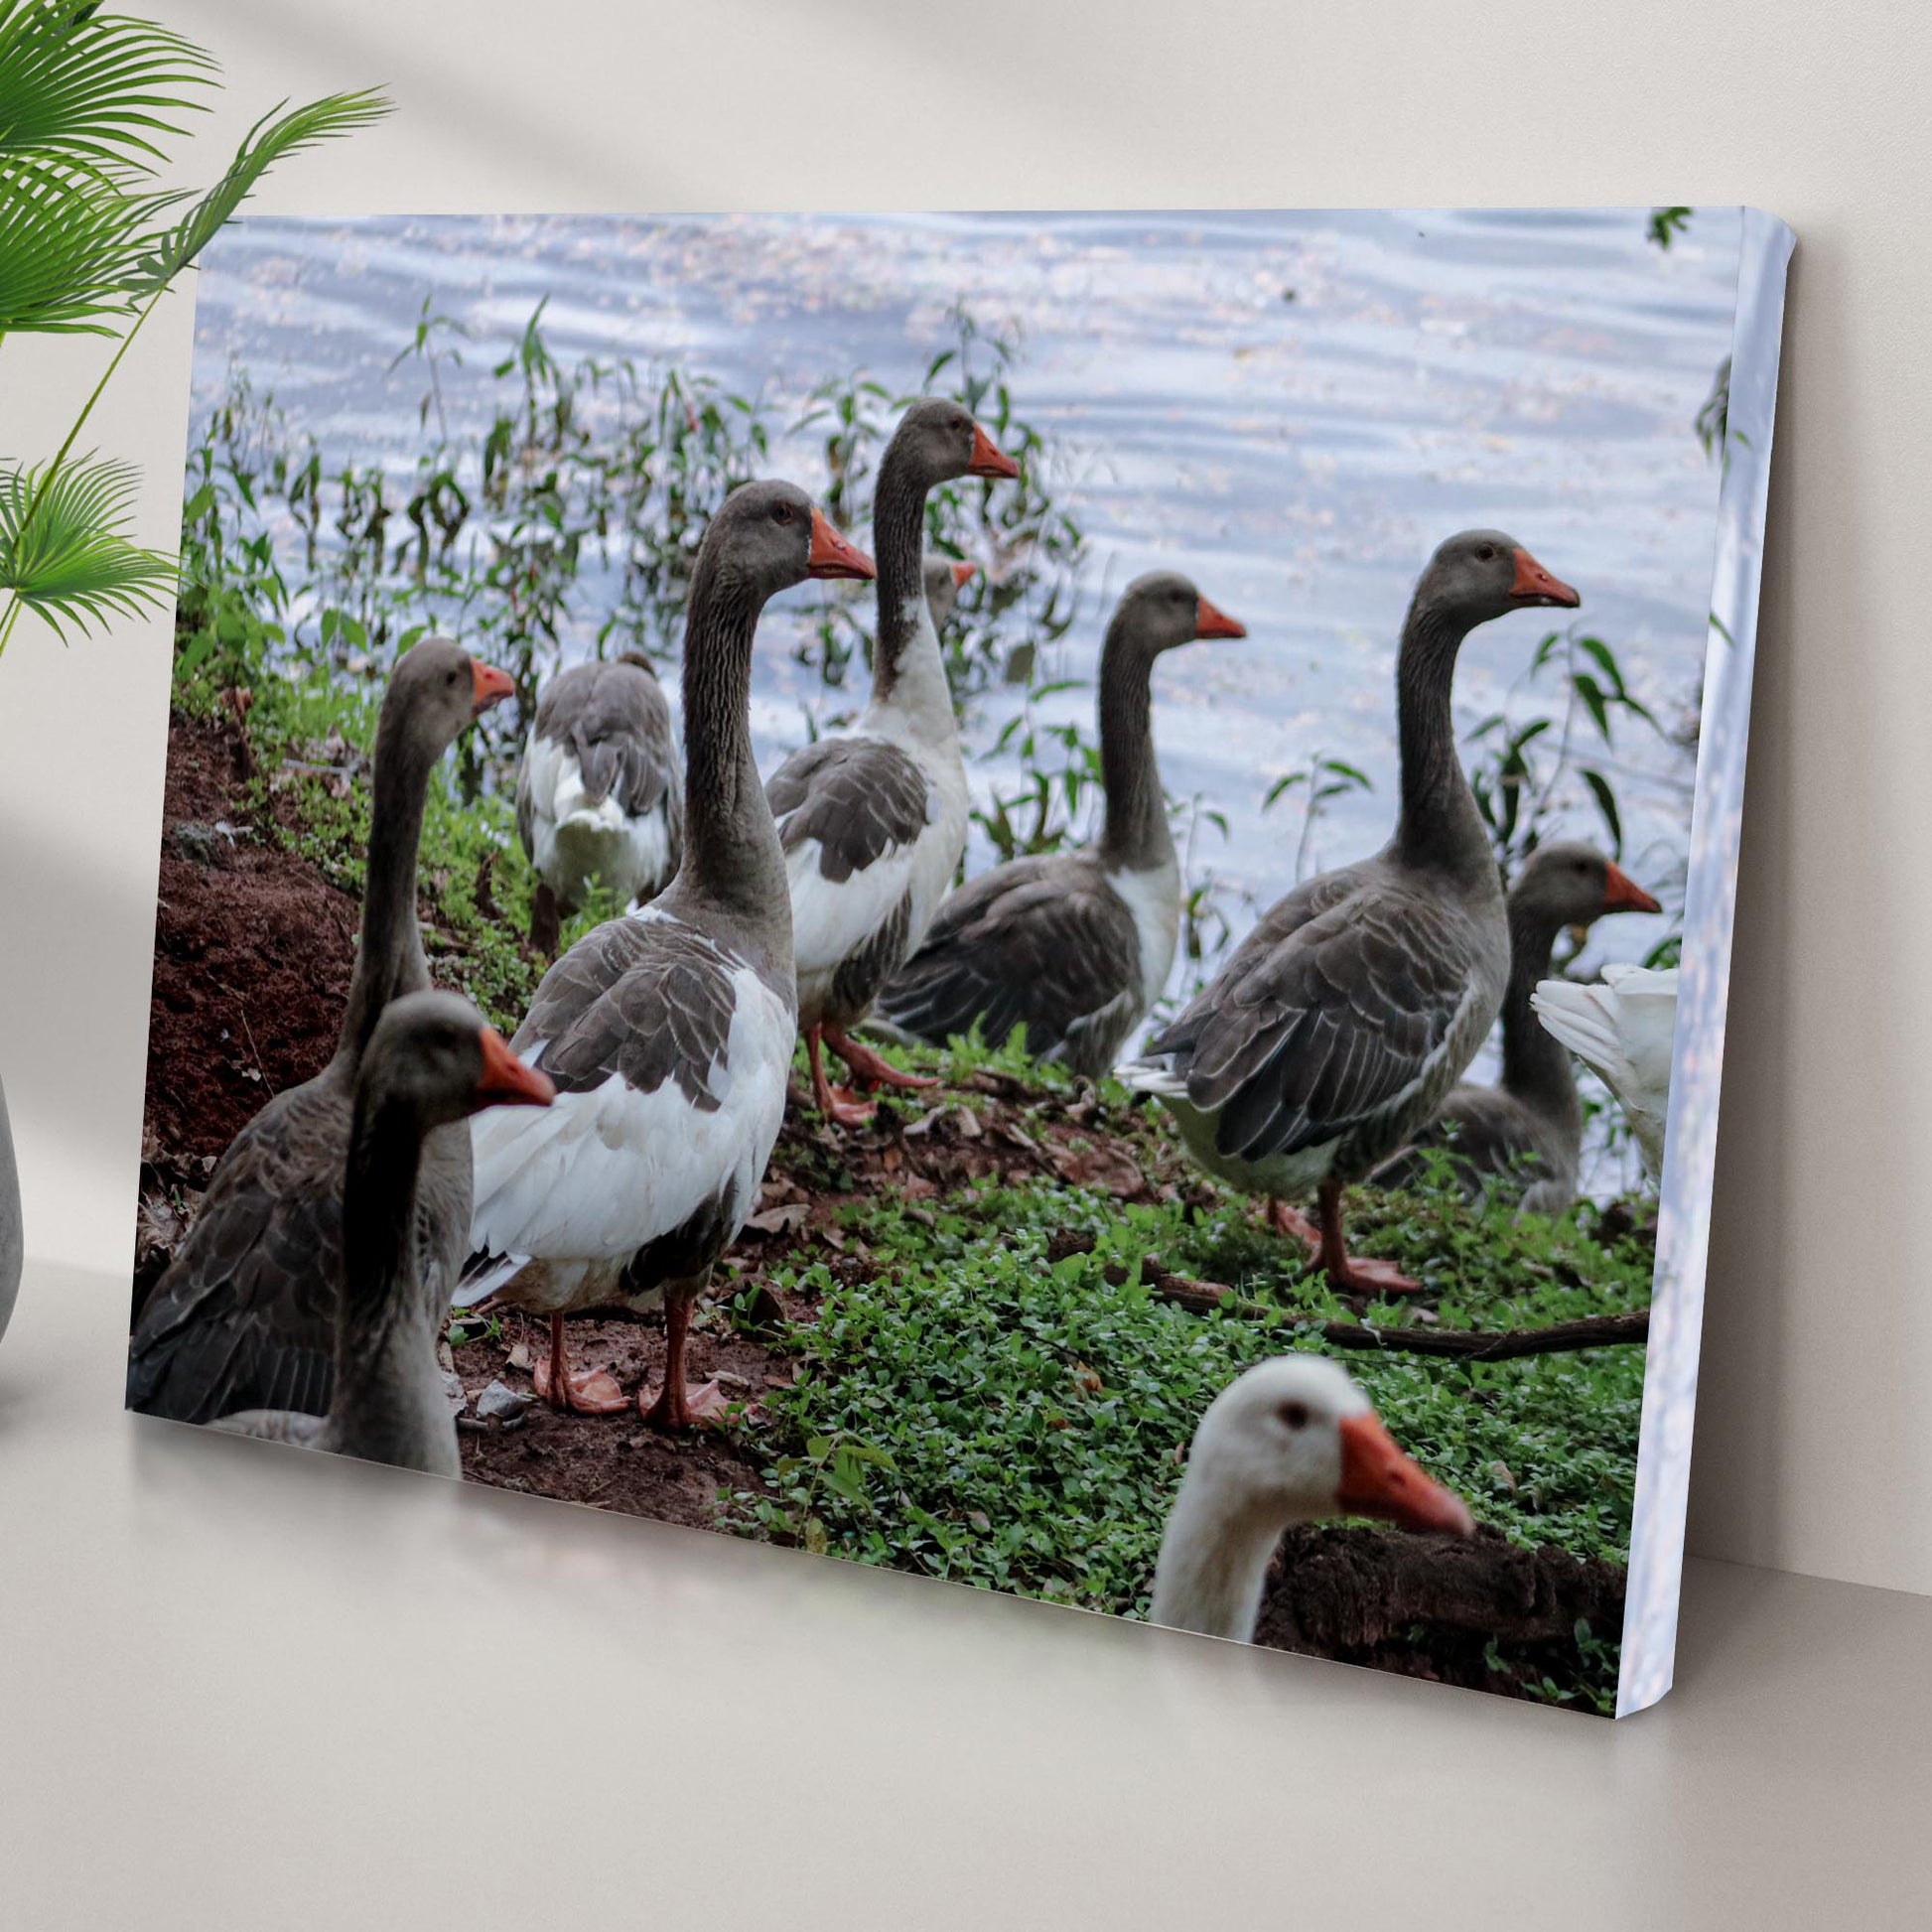 Flock Of Domestic Geese Canvas Wall Art Style 1 - Image by Tailored Canvases